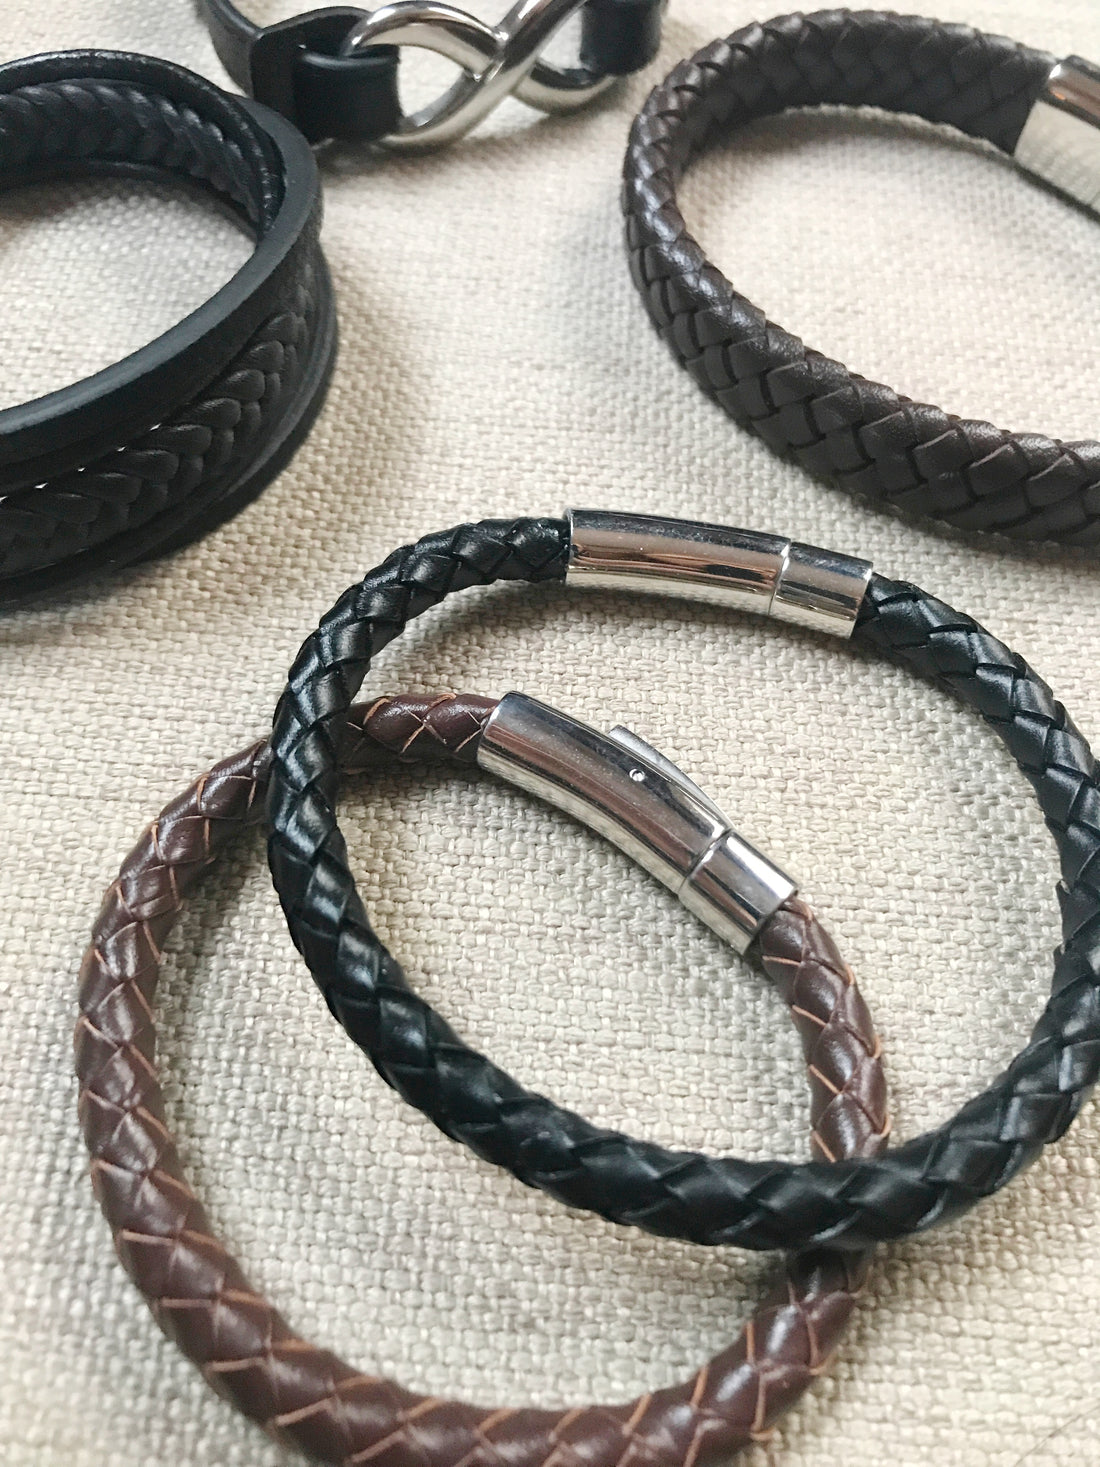 How to care for leather necklace cords and bracelets